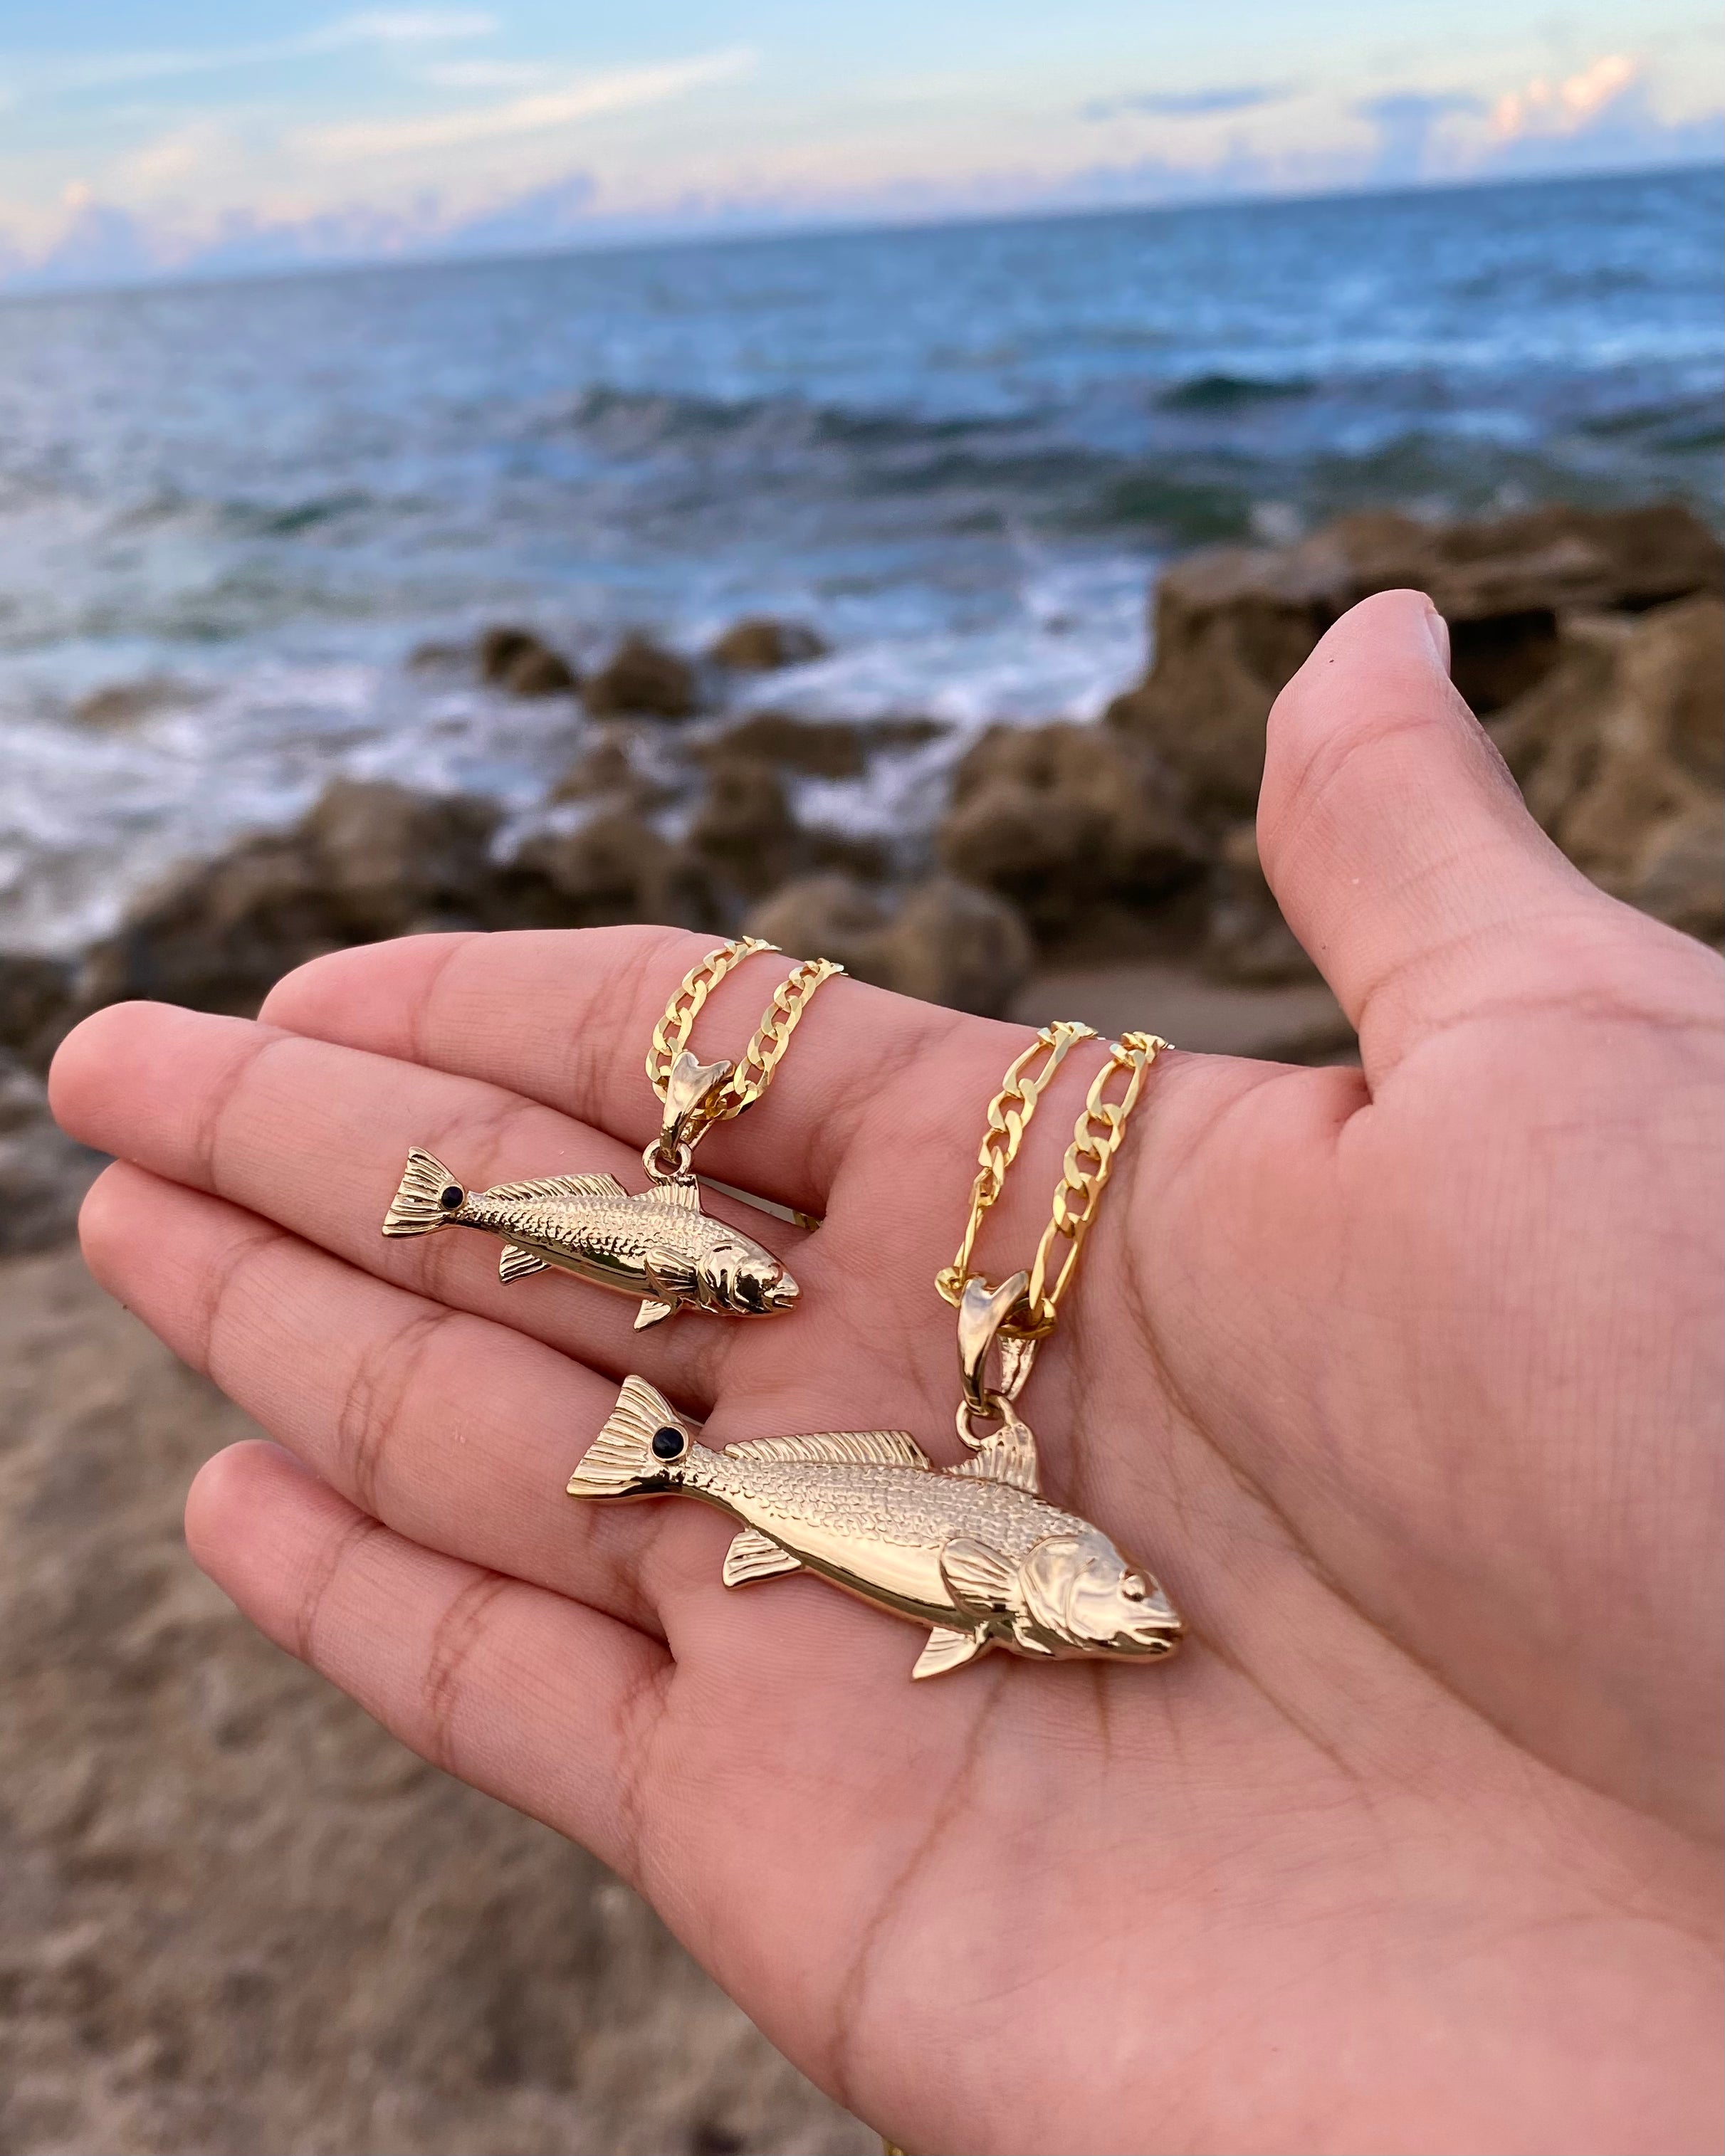 Standard and Small size Redfish necklaces in gold by Castil.